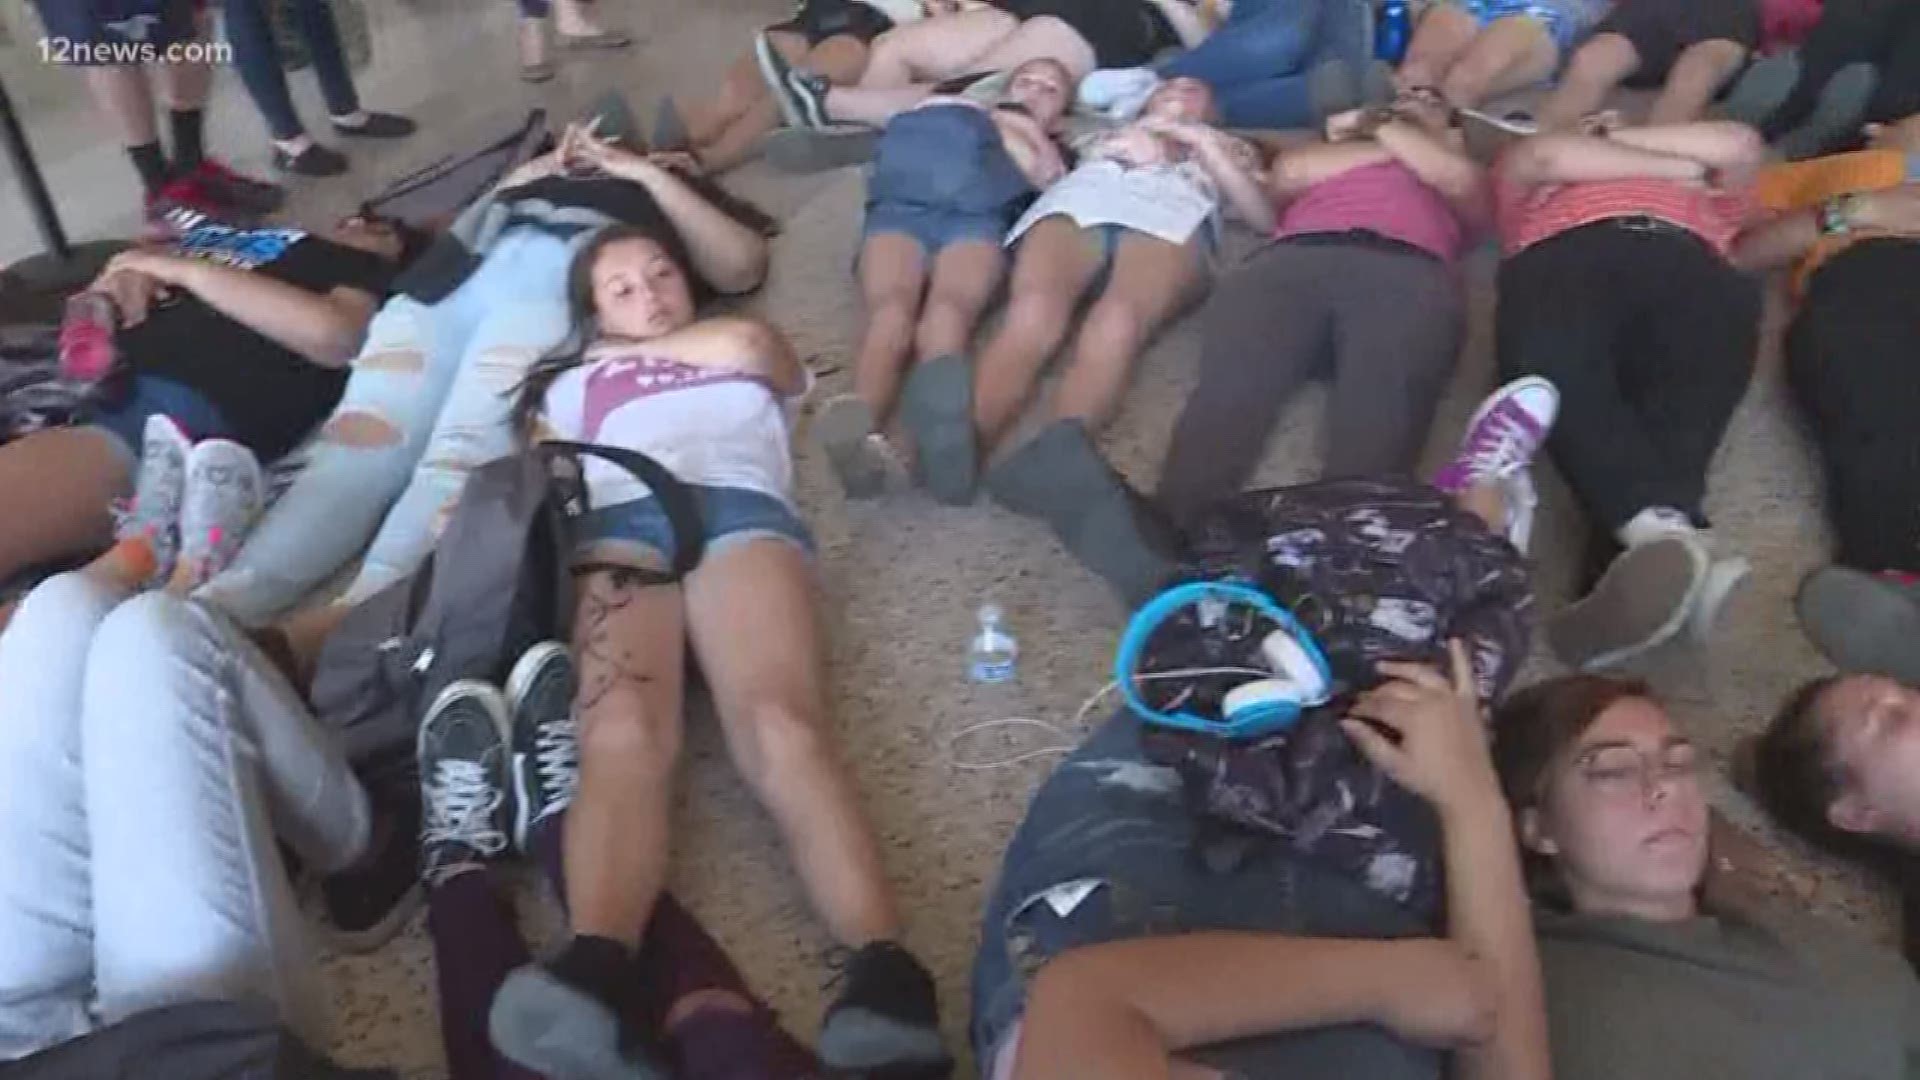 Students staged a "die-in" on the floor of the State Capitol to protest gun violence. .